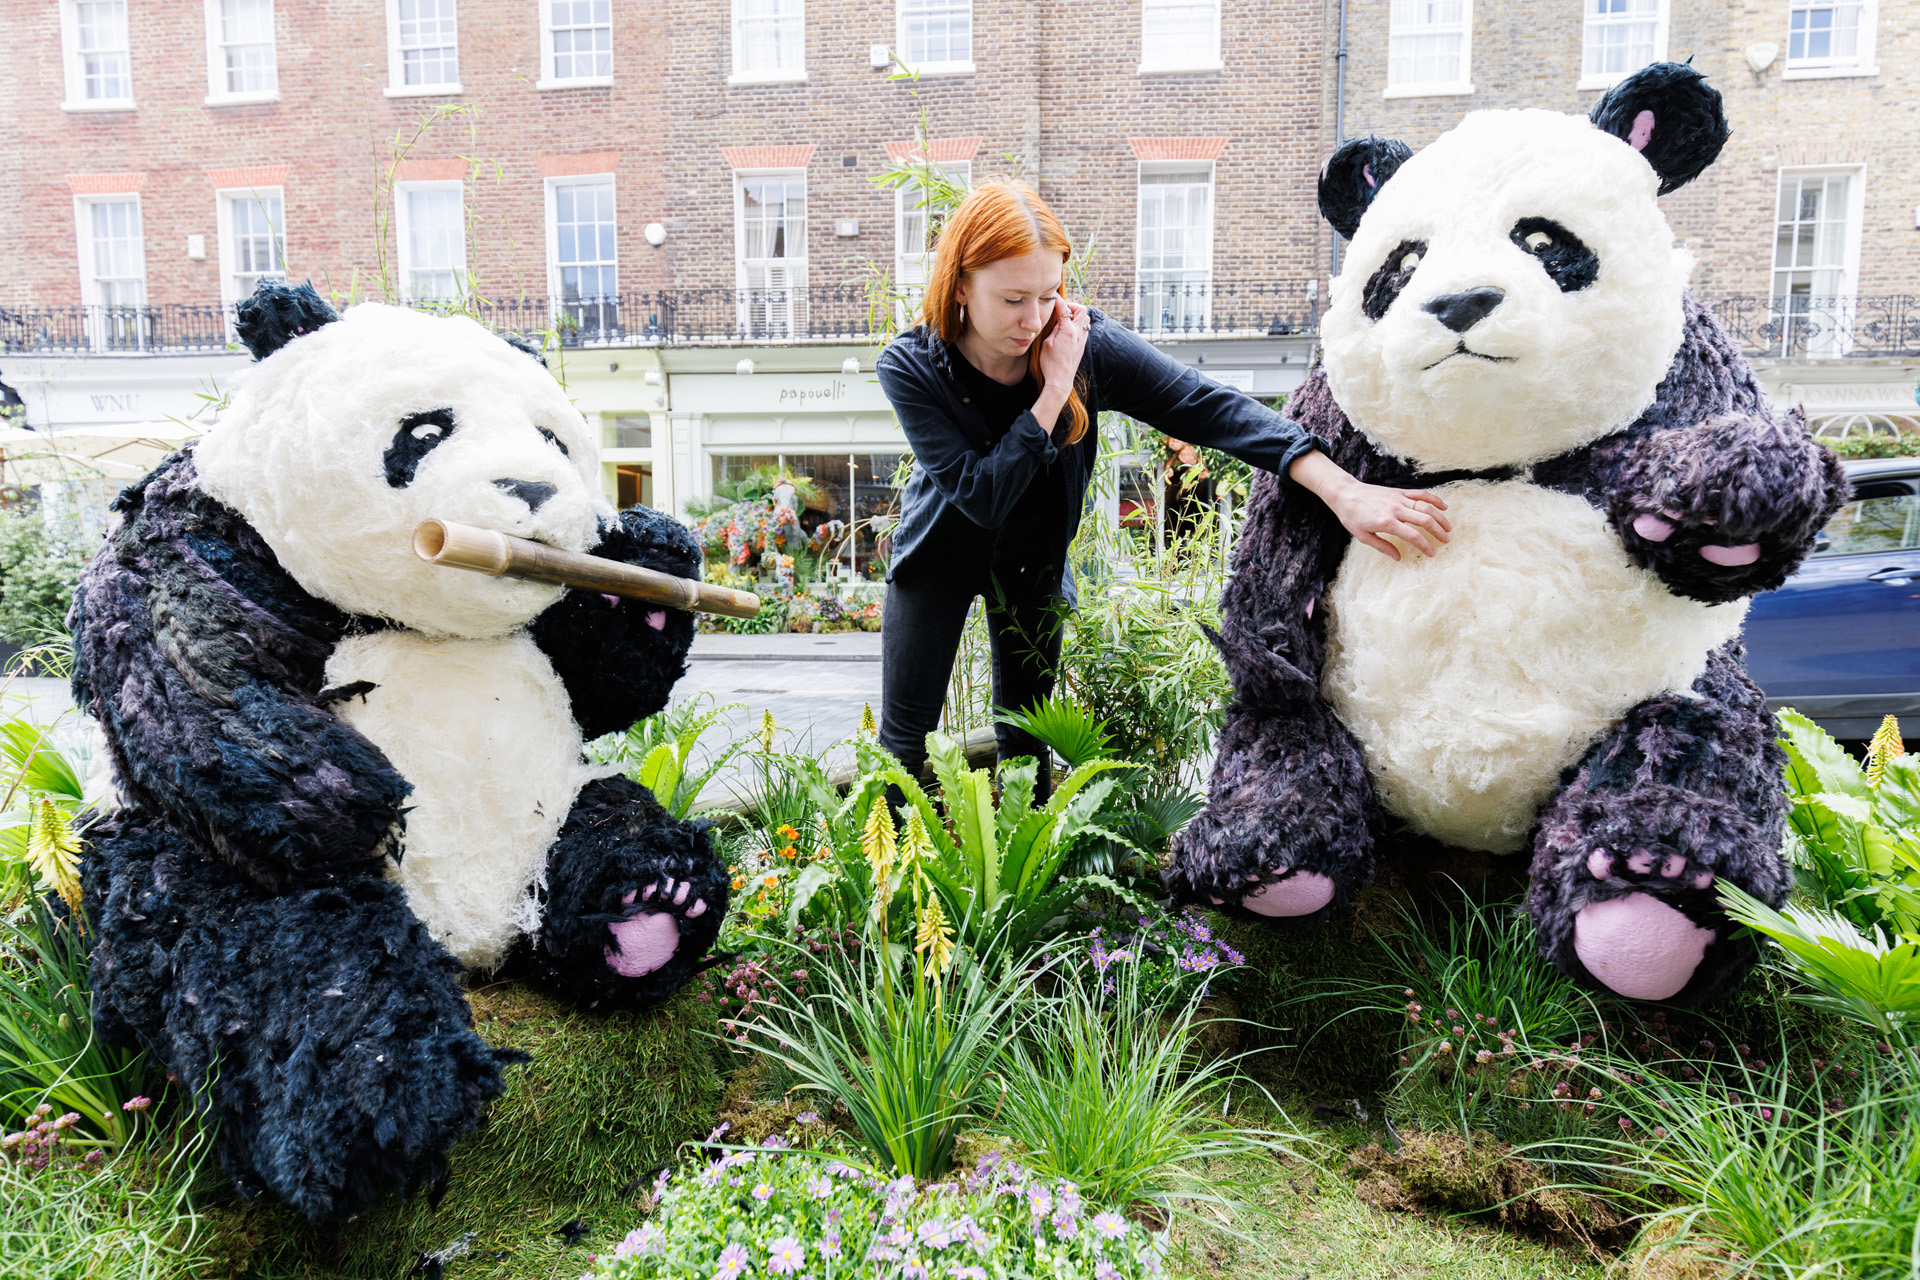 A florist from Moyses Stevens puts the finishing touches to a floral installation, ‘Belgravia’s Bamboo Bears’, on Elizabeth Street, London, which has been designed for the Belgravia in Bloom festival, running from May 22-29, London. Picture date: Sunday May 21, 2023. PA Photo. The theme for this year's festival is ‘Into the Wild’, and includes a partnership with conservation charity London Wildlife Trust. The festival aims to support the charity’s mission to boost biodiversity and inspire Londoners to connect with nature, as well as ensuring the floral installations are created using even more biodiversity-boosting plants and flowers this year.